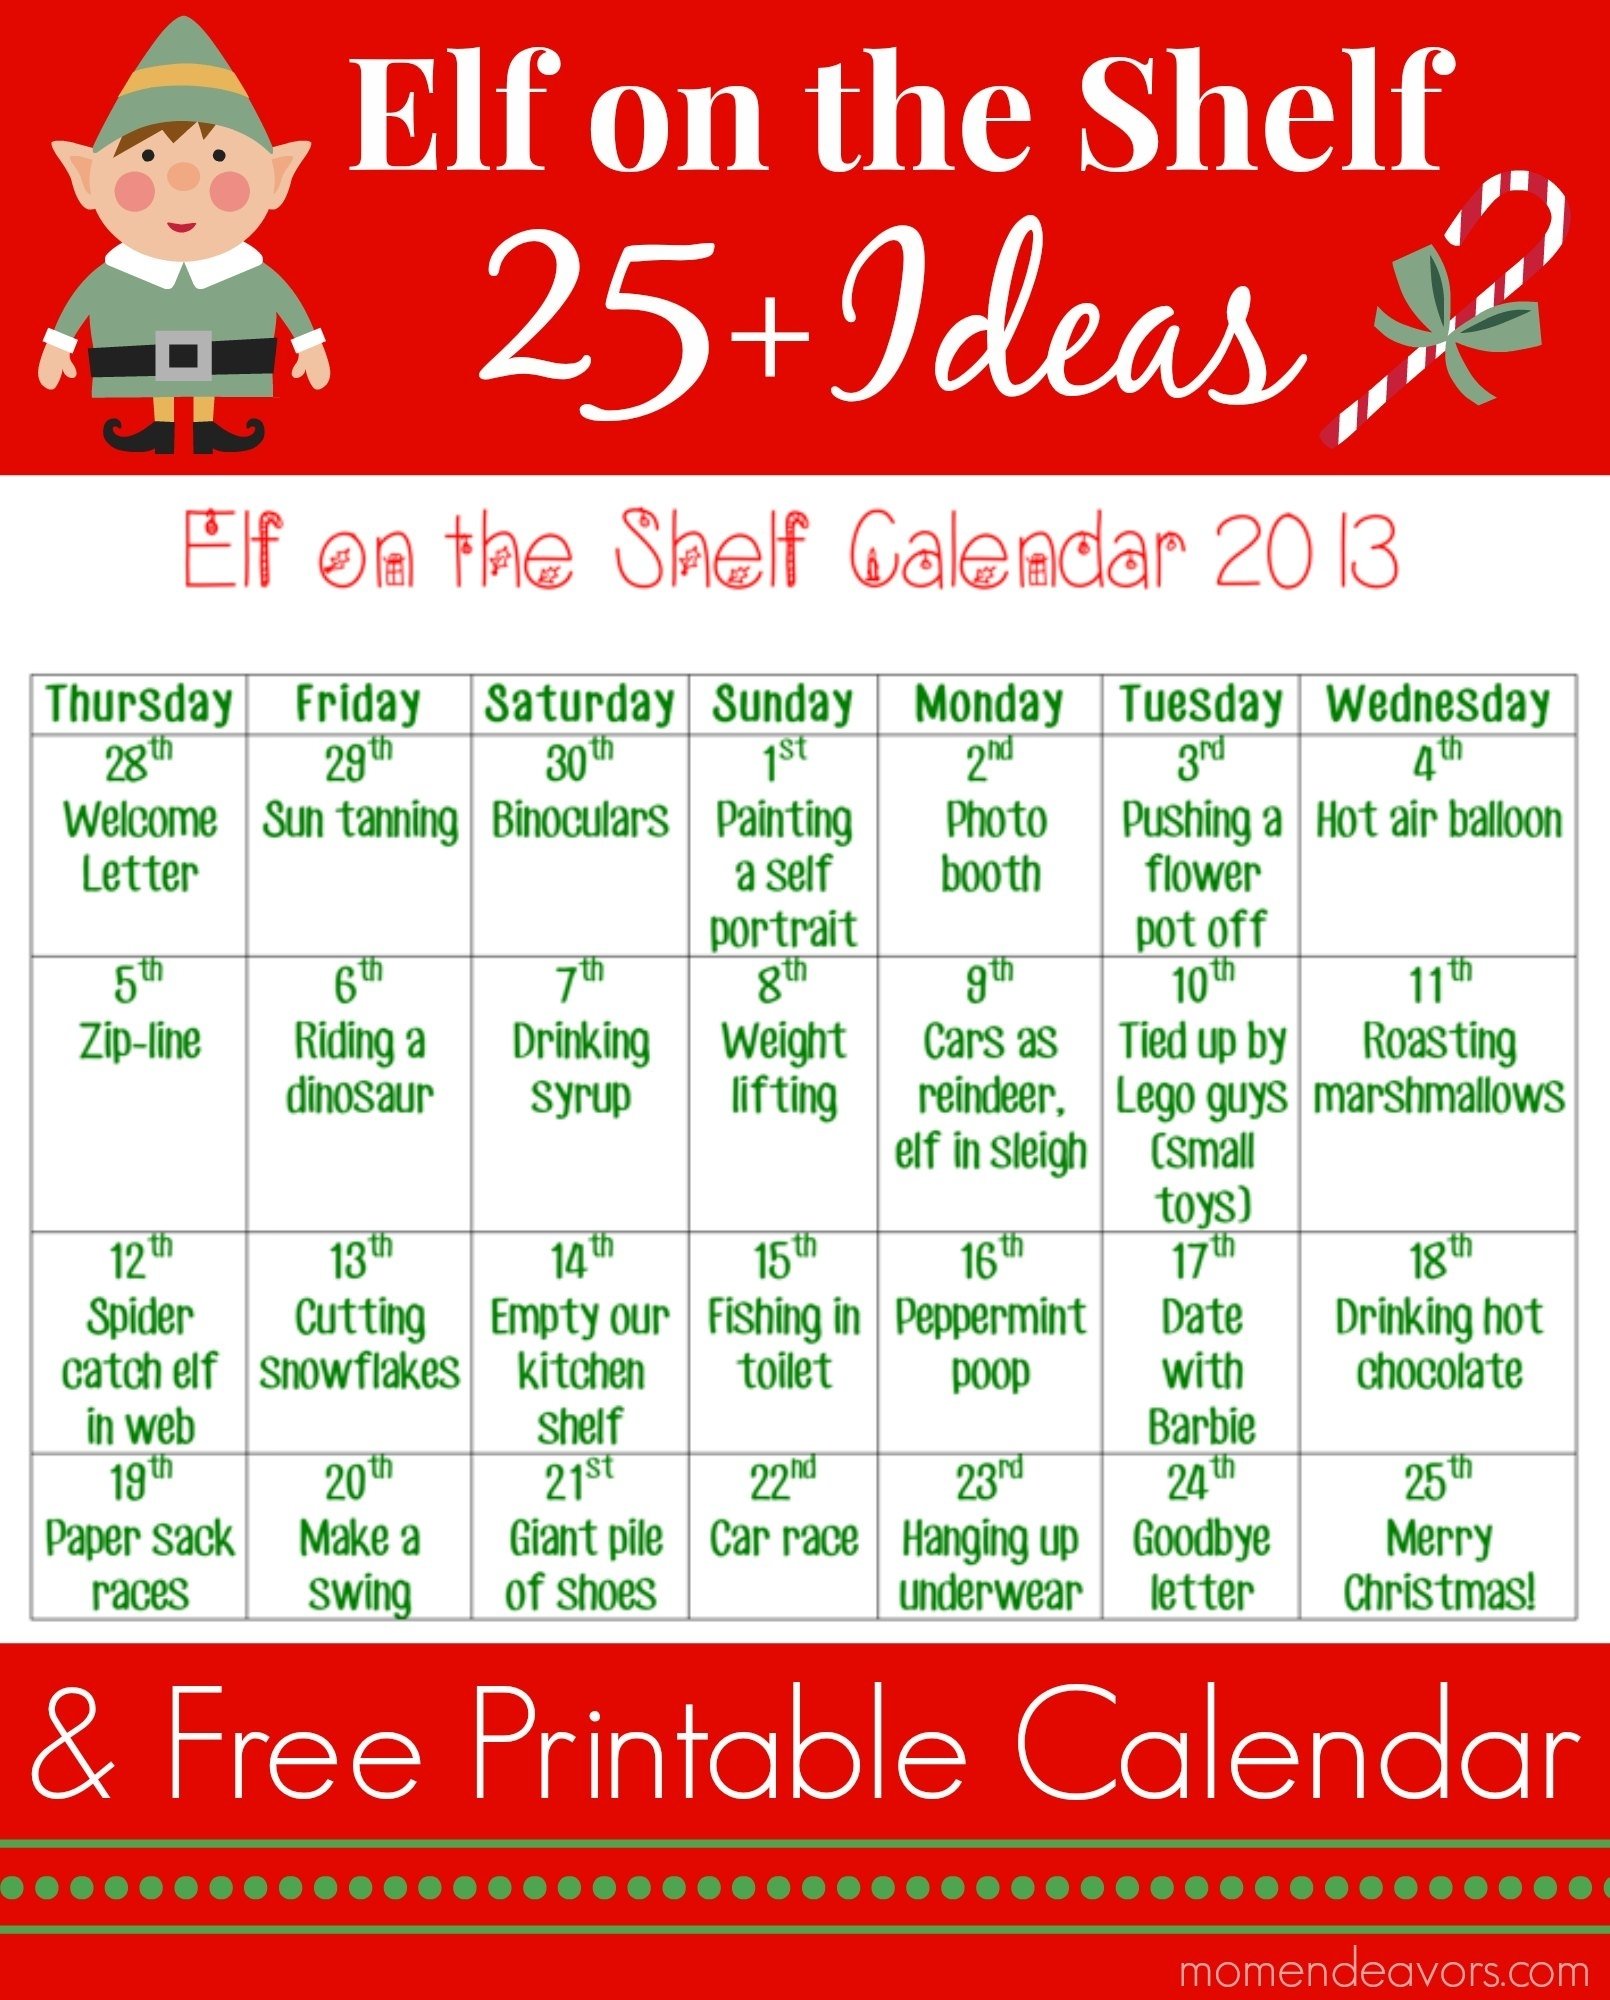 10 Fashionable Elf On The Shelf Name Ideas For Boys 25 elf on the shelf ideas with printable calendar an 3 2022